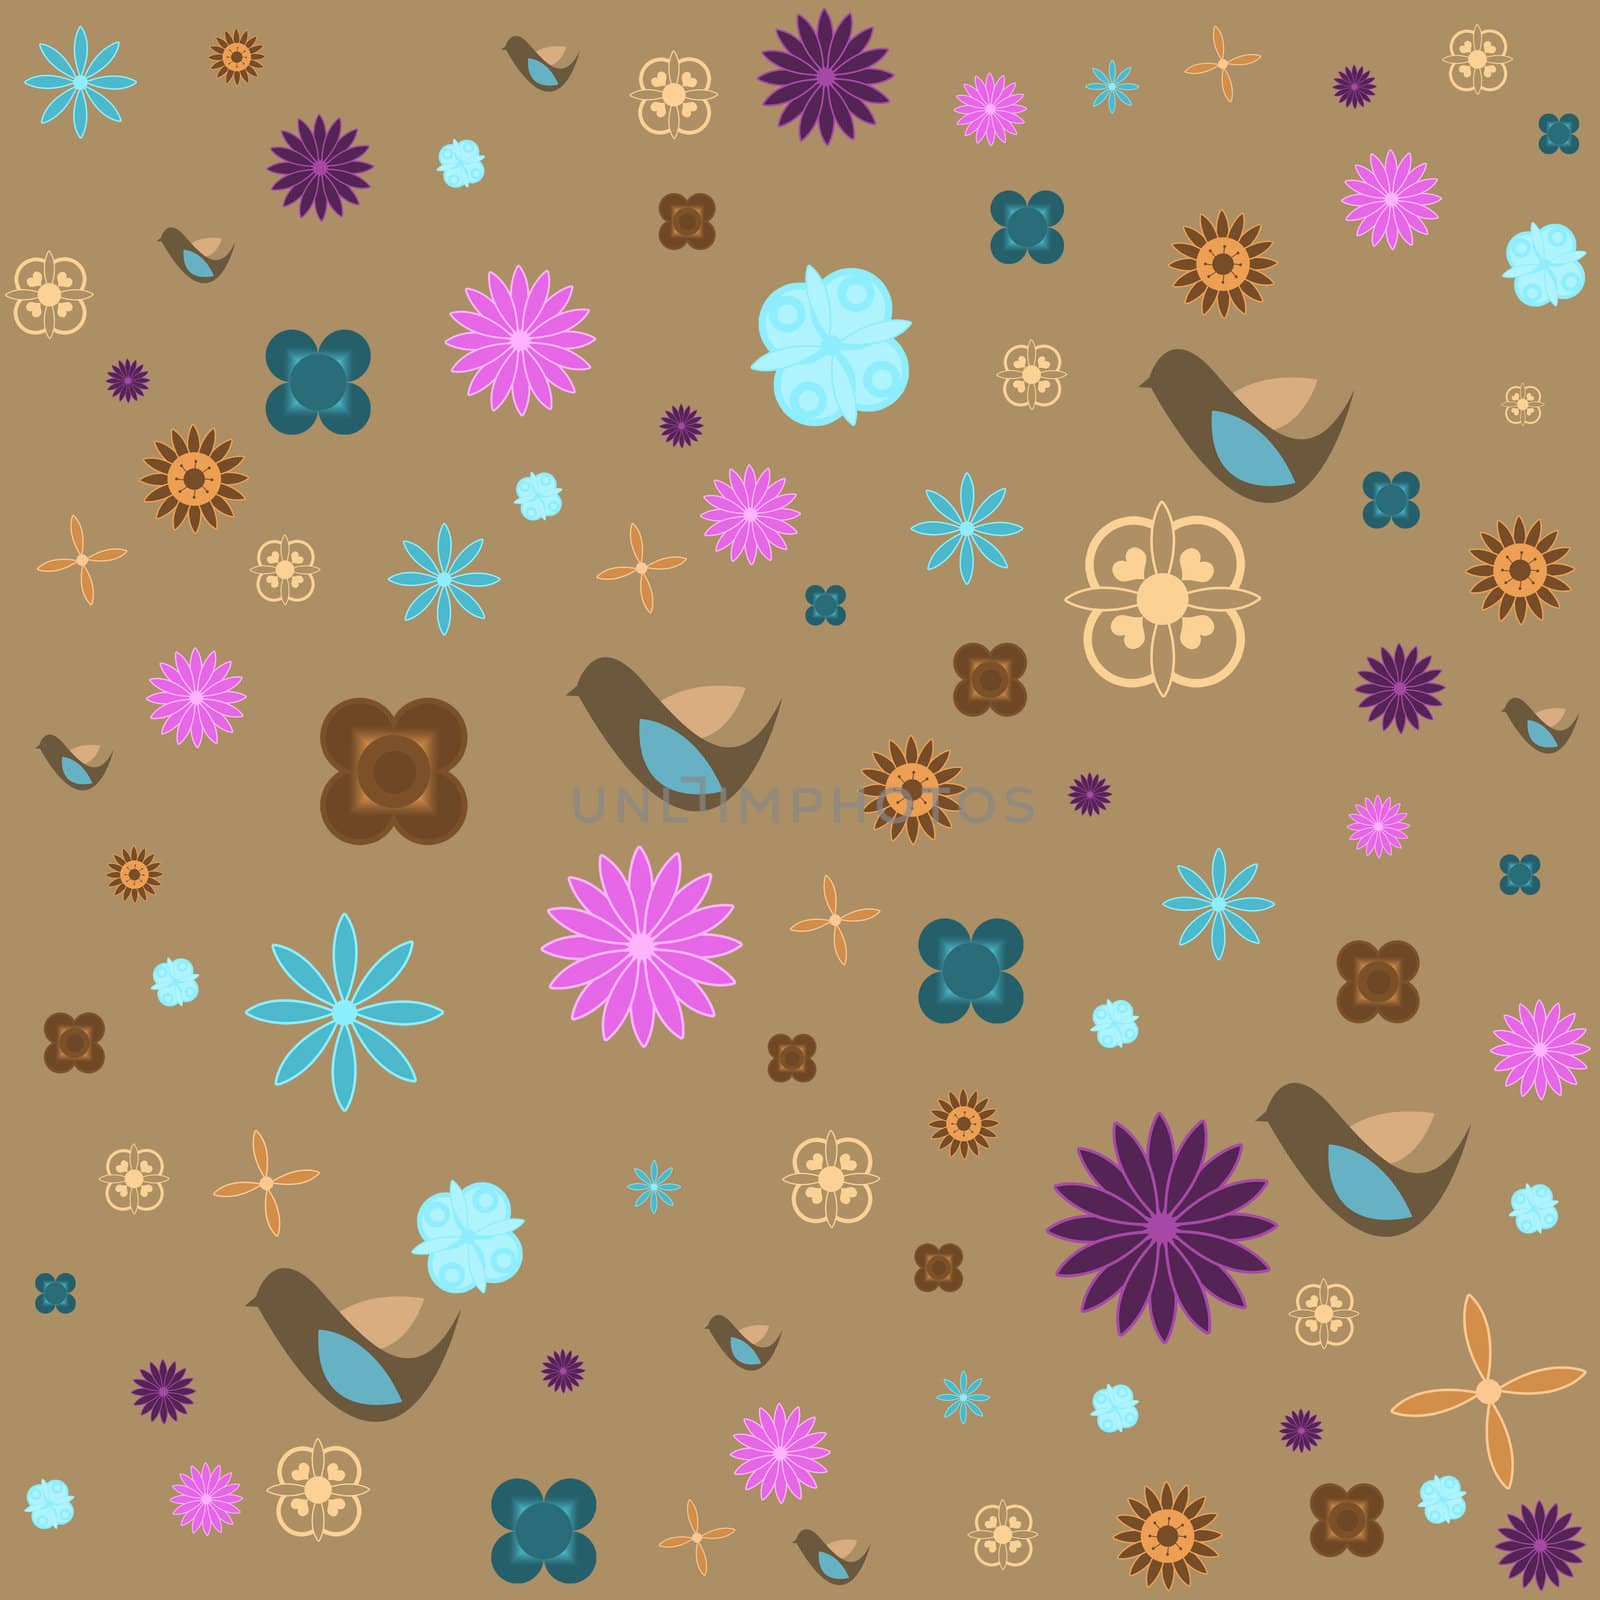 Retro birds and flowers background by ftlaudgirl